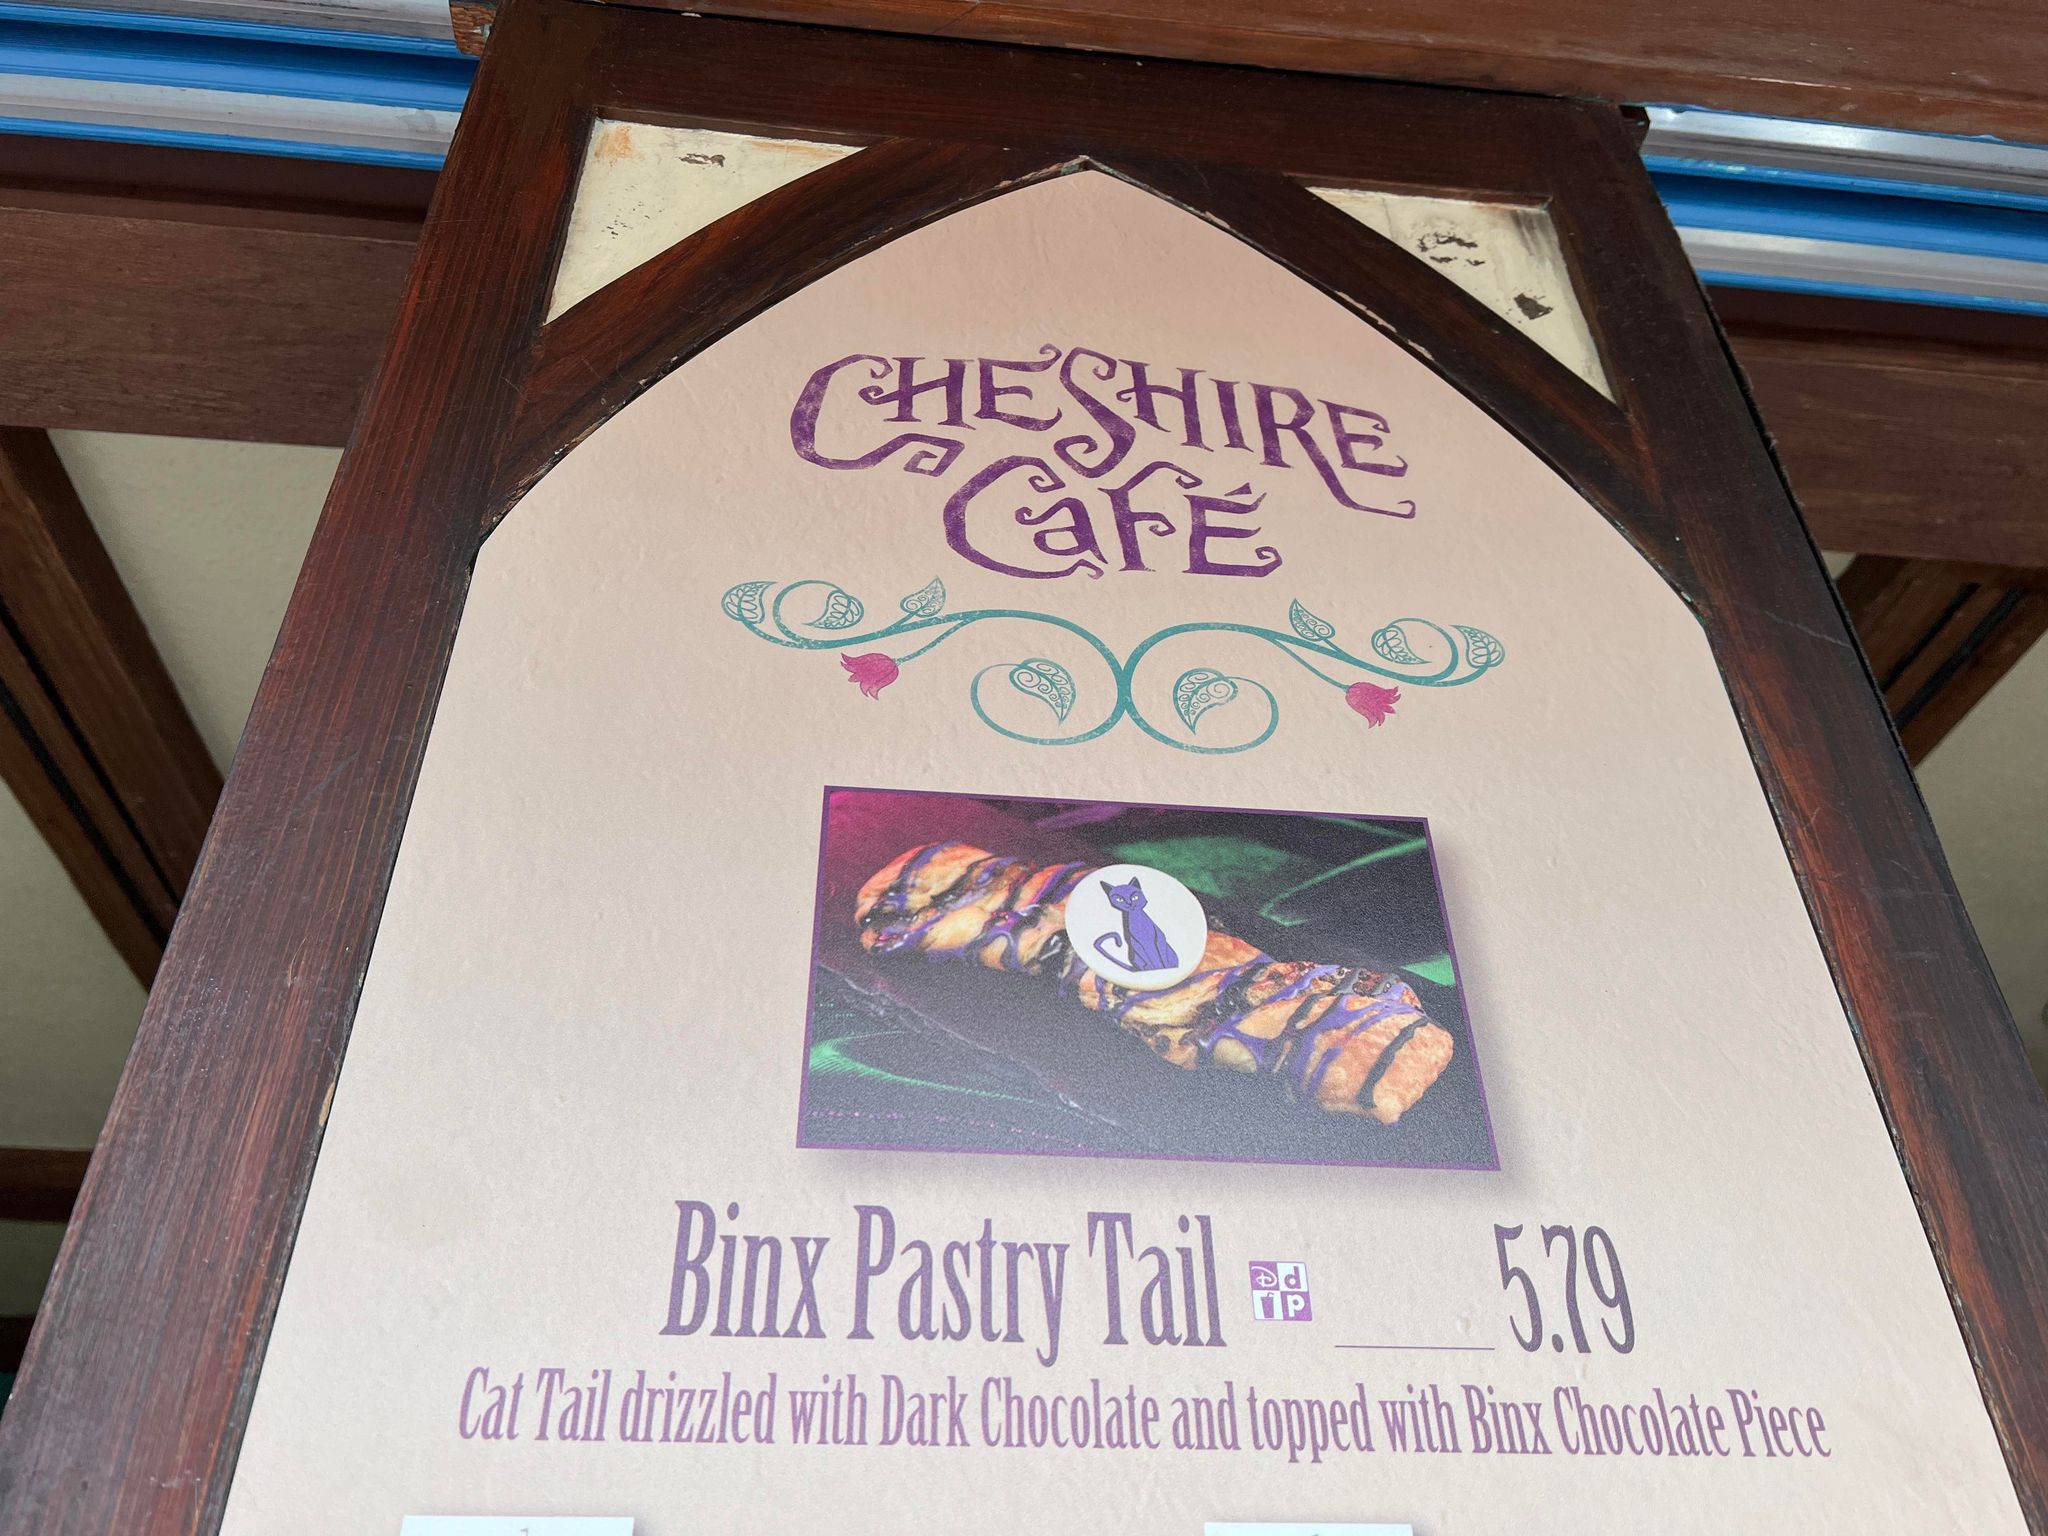 binx pastry tail cheshire cafe